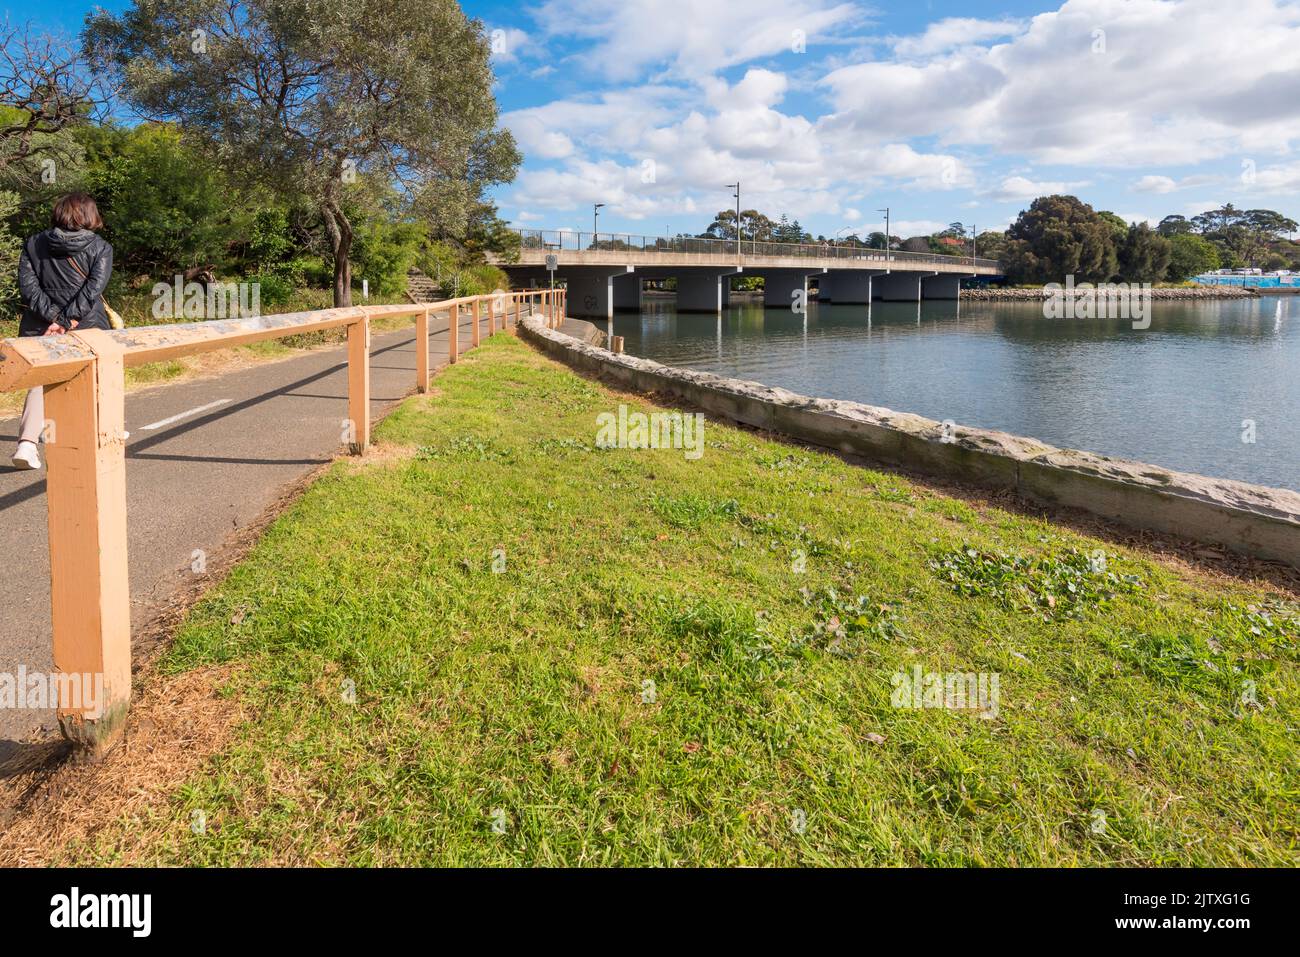 Hawthorne Canal, built in 1891 following agitation in the NSW Parliament during 1890 by John Hawthorn, it flows into Sydney Harbour via Parramatta R. Stock Photo